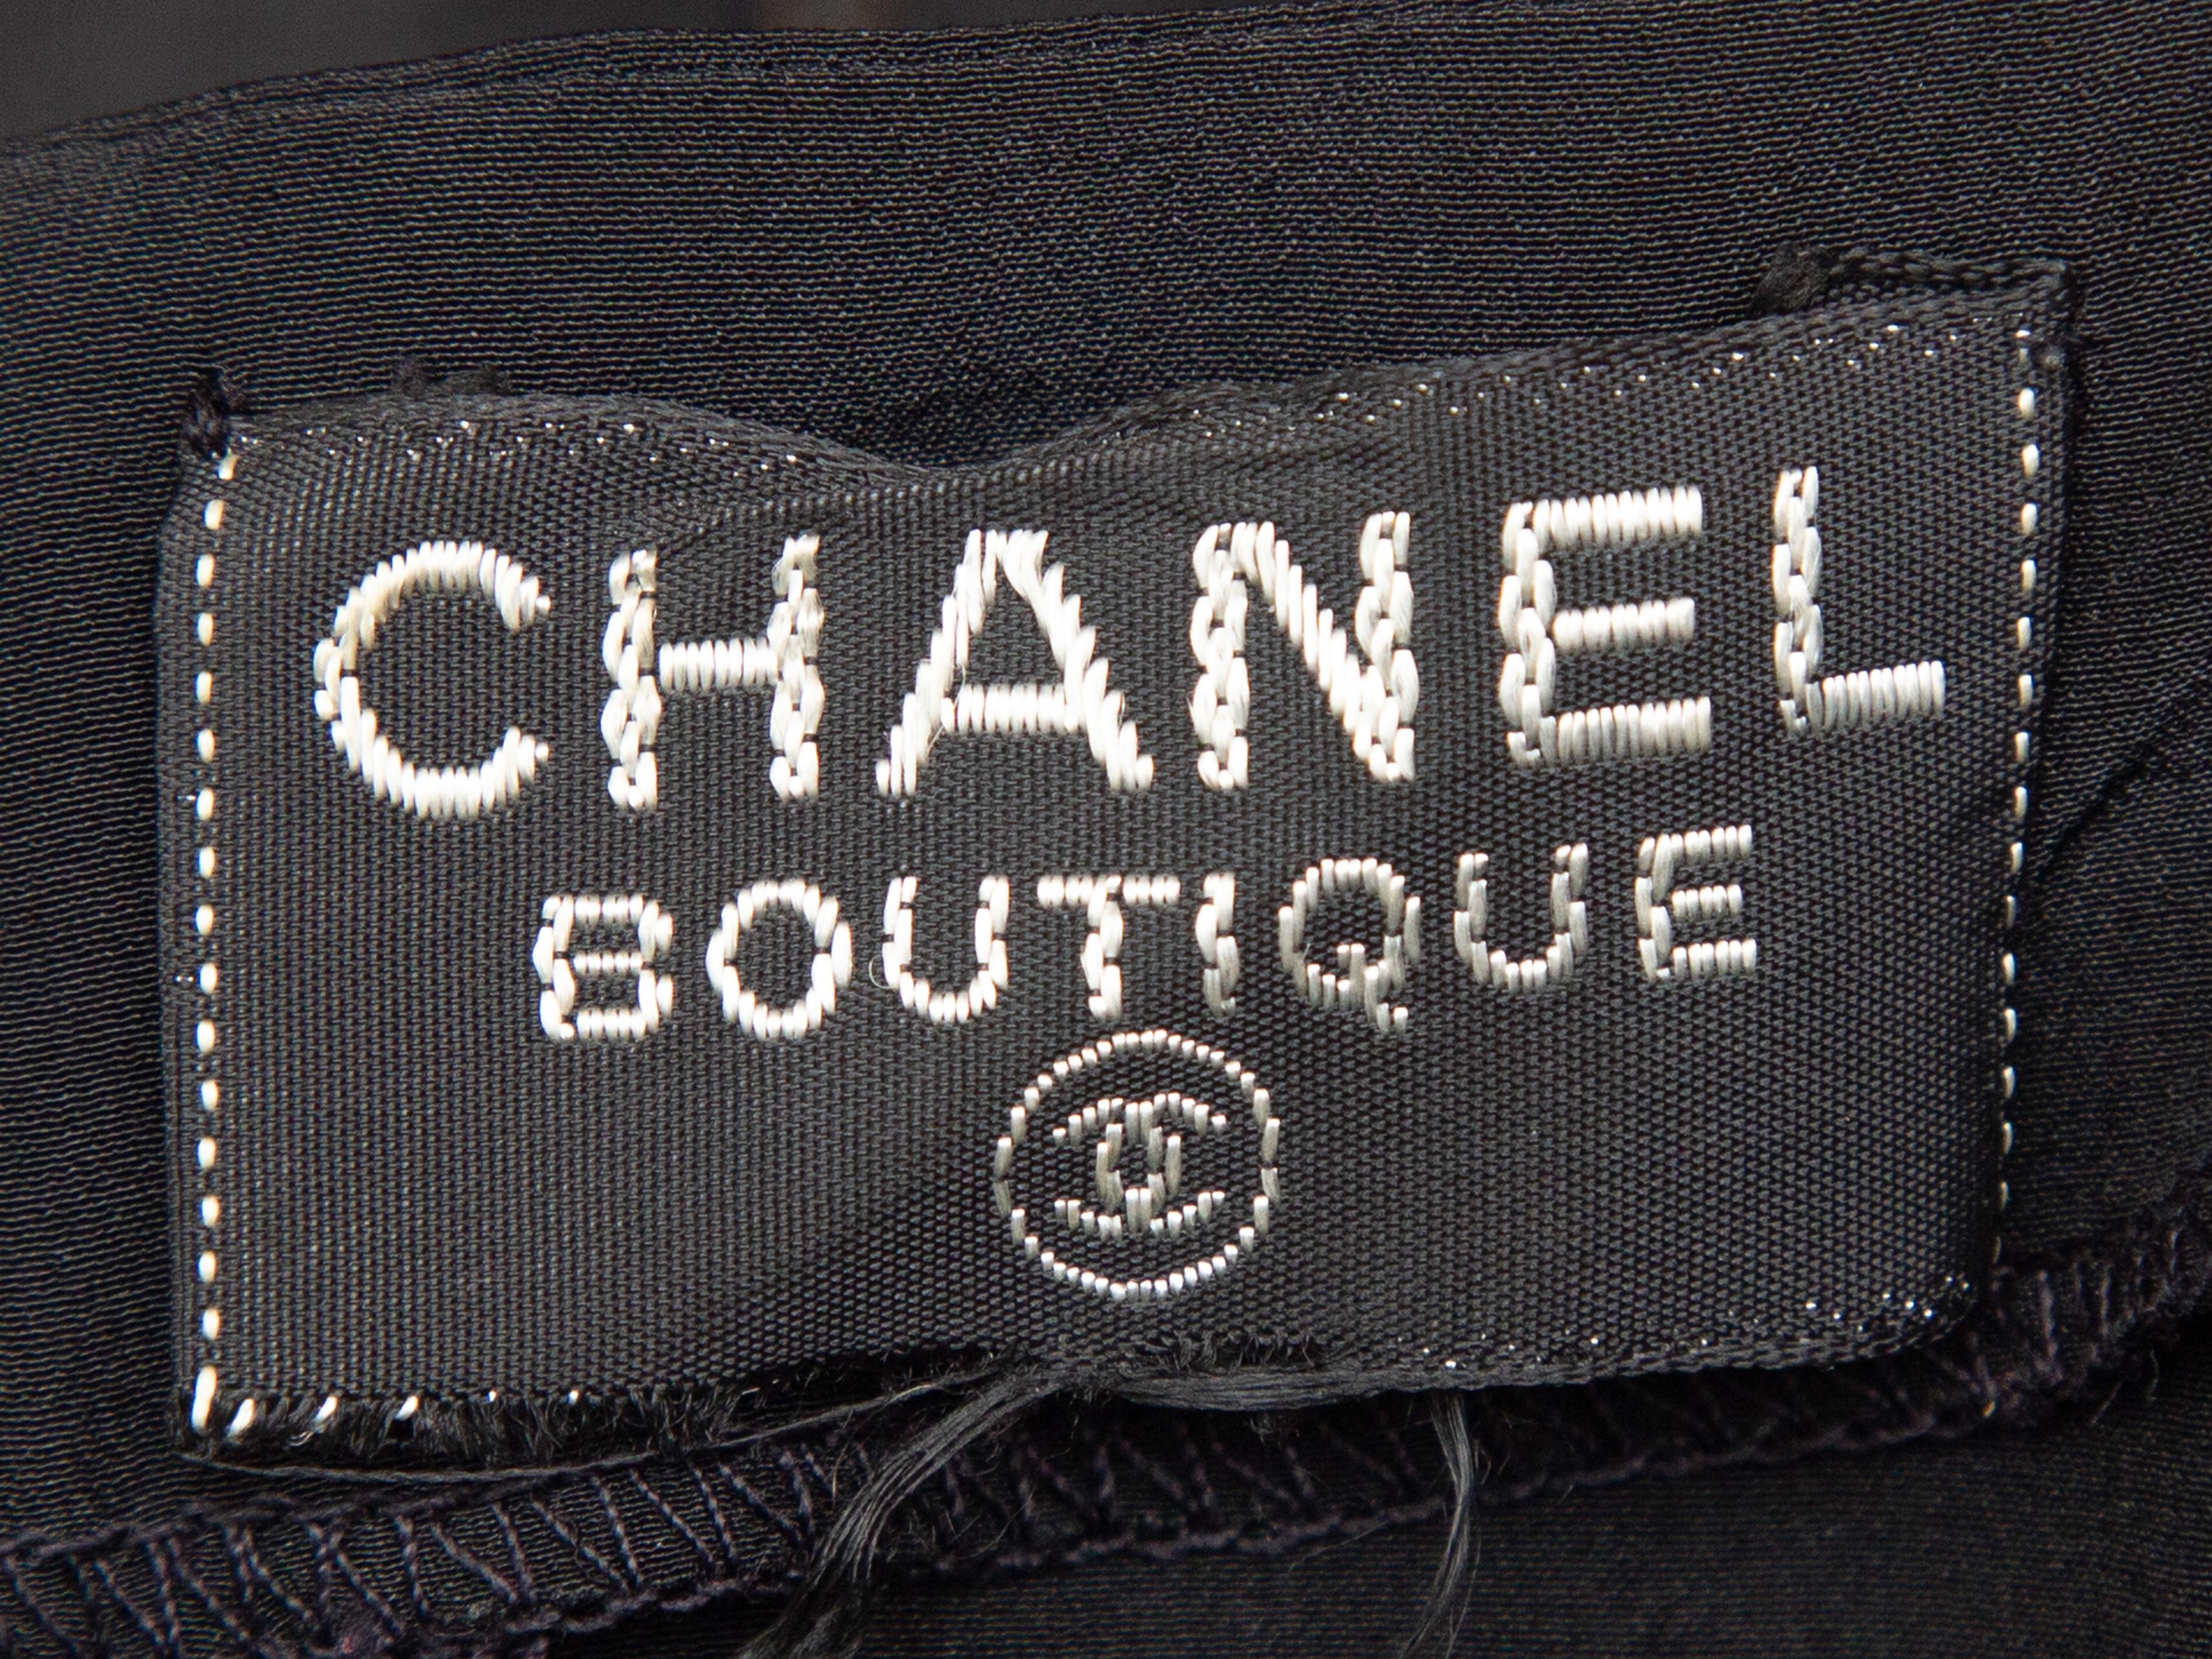 Product details: Vintage black silk camisole by Chanel Boutique. V-neck. Narrow straps. Zip closure at back. 30